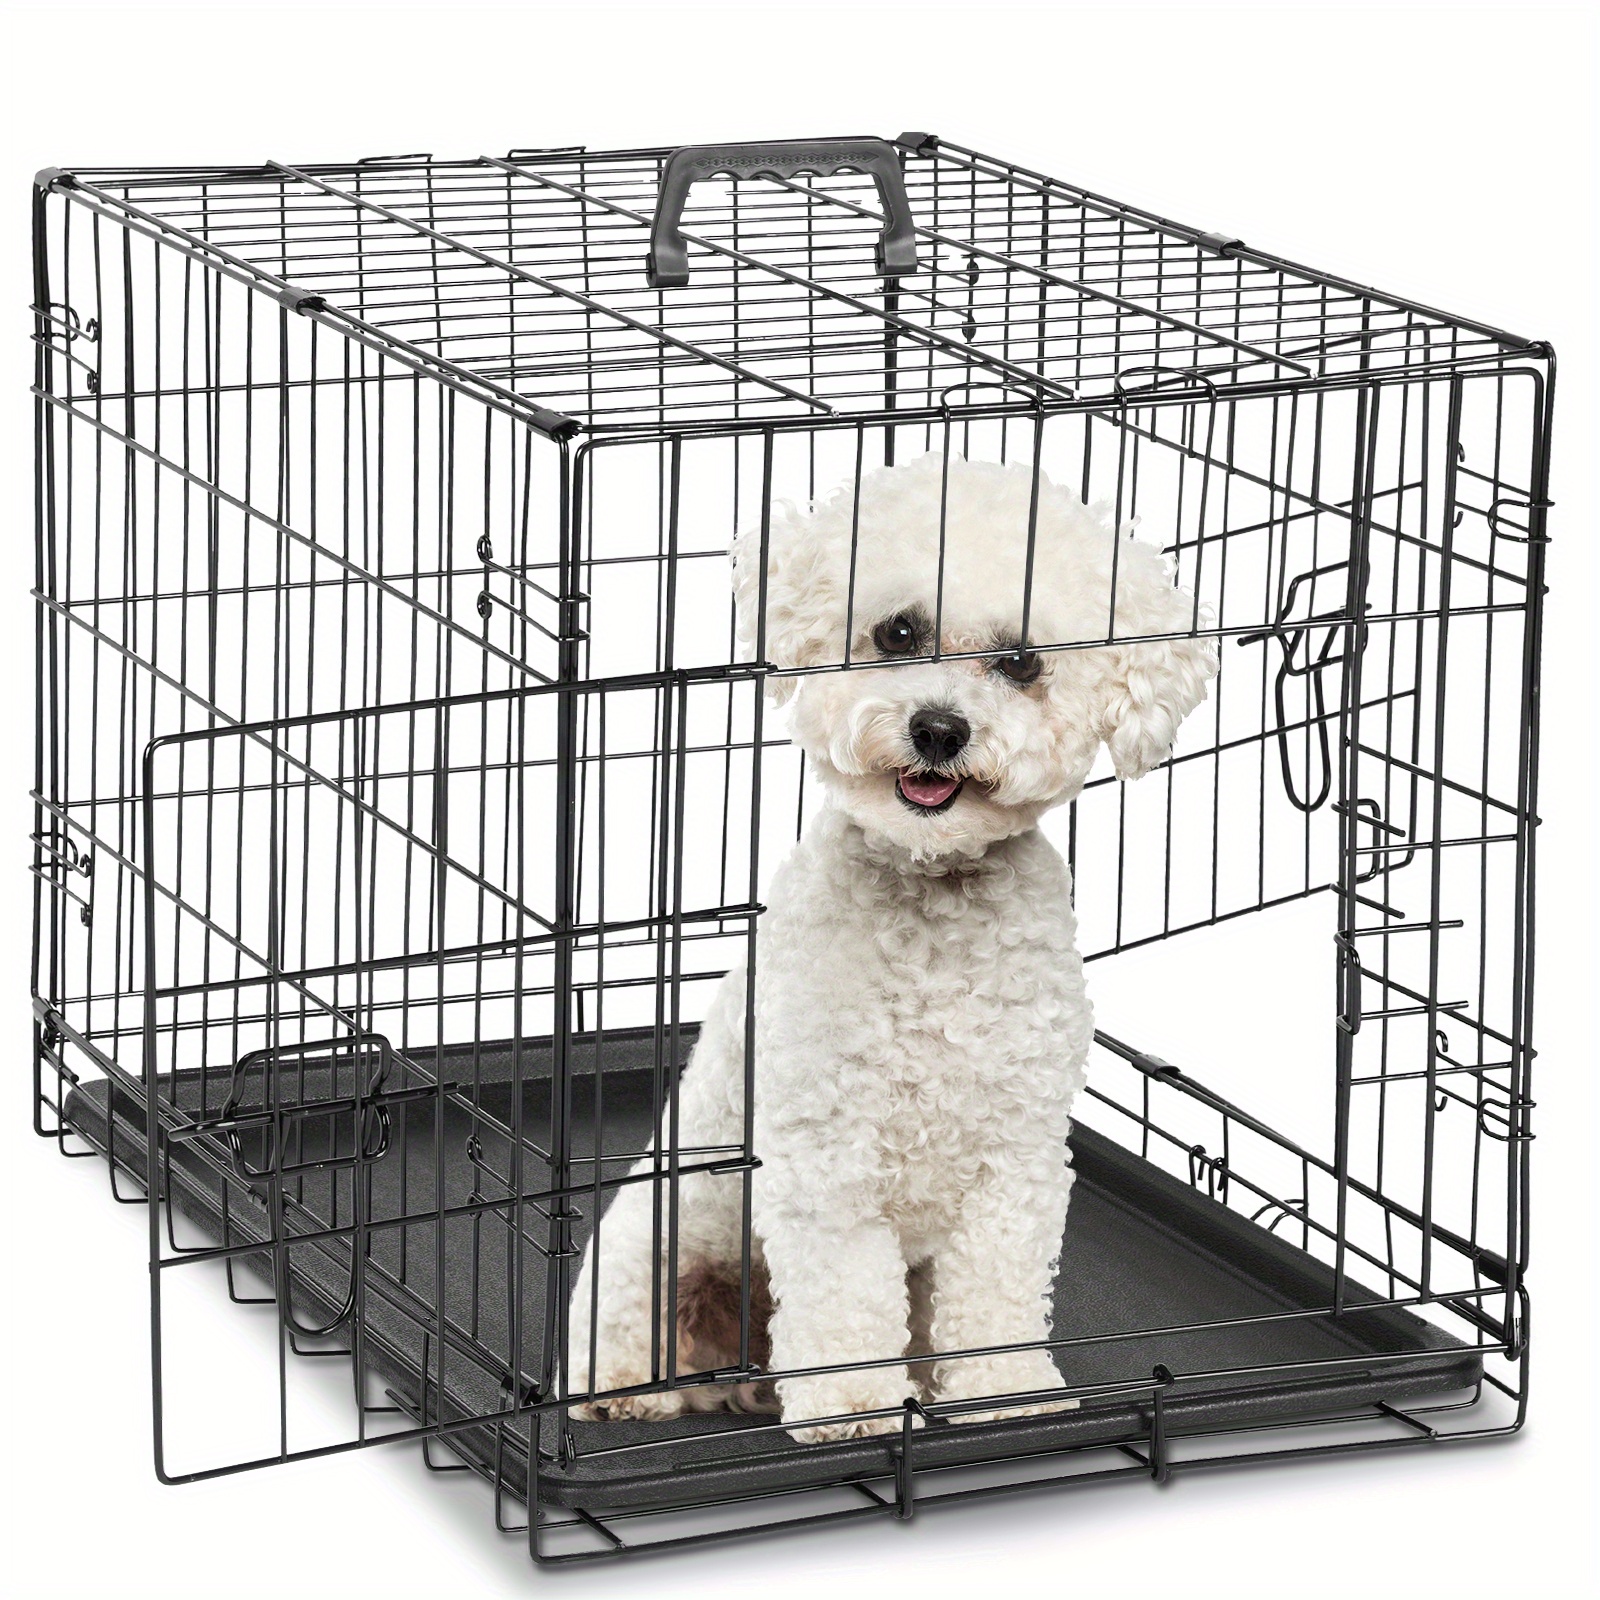 

Sweetcrispy Foldable Metal Dog Crate 24 Inch, Double Door Pet Cage With Divider And Leak-proof Tray, Portable Indoor Wire Kennel For Small Dogs